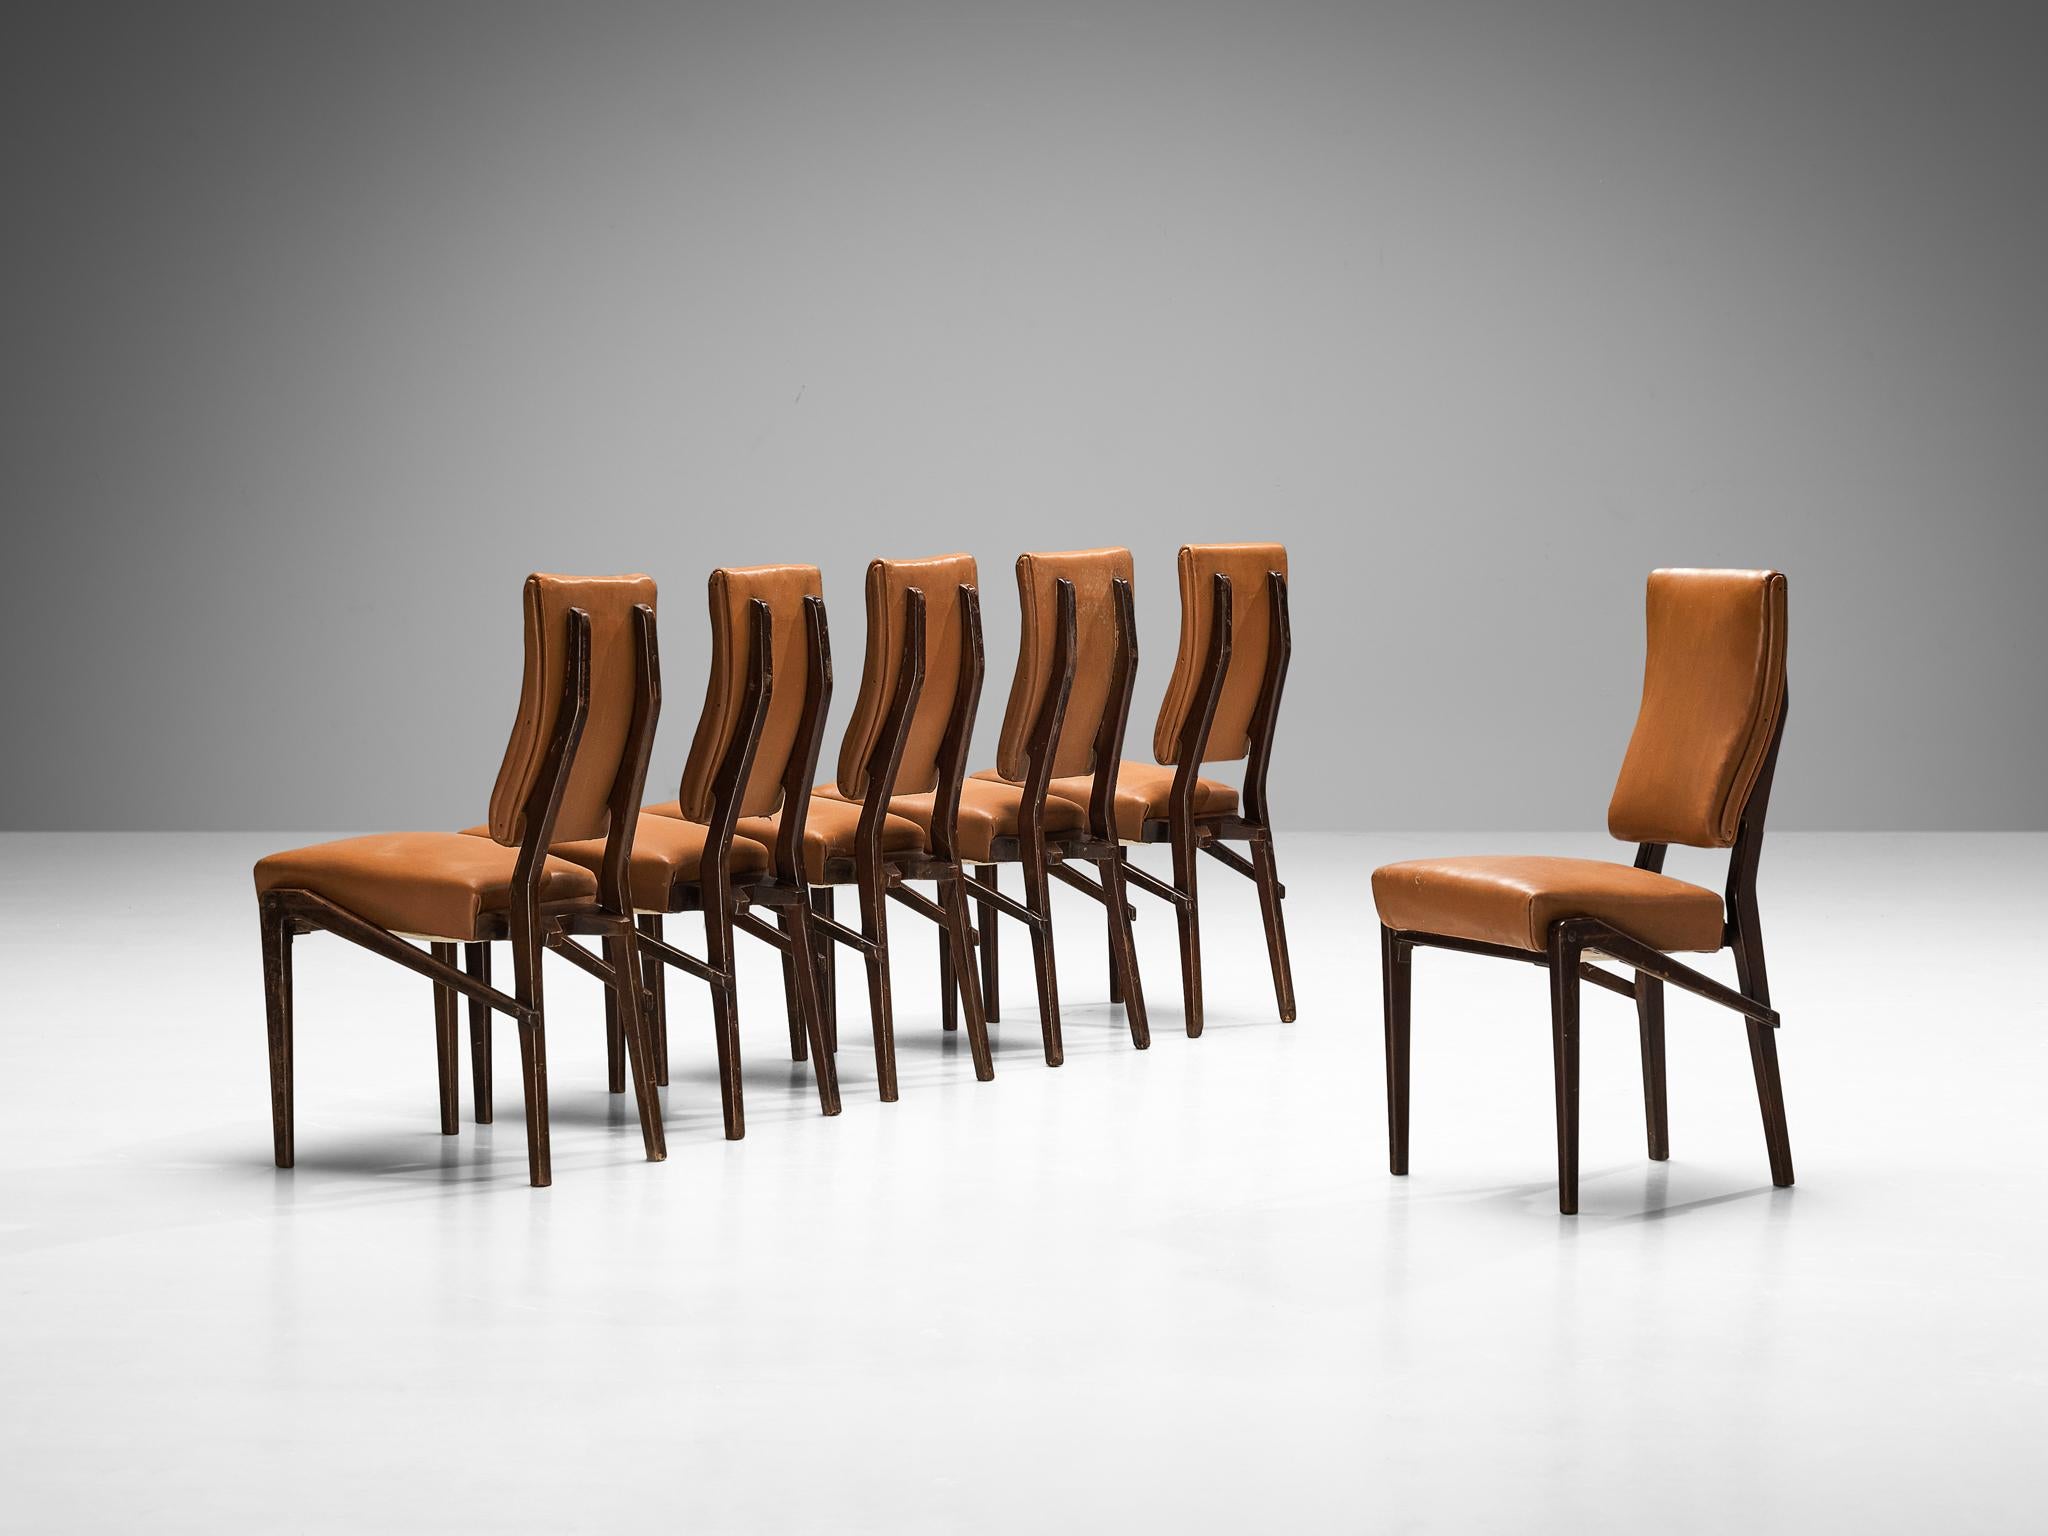 Mario Oreglia, set of six dining chairs, faux leather, lacquered wood, Italy, 1950s

Mario Oreglia (1916-1989) emerged as one of the leading furniture designers in the post-World War II era. His designs gained widespread recognition, frequently